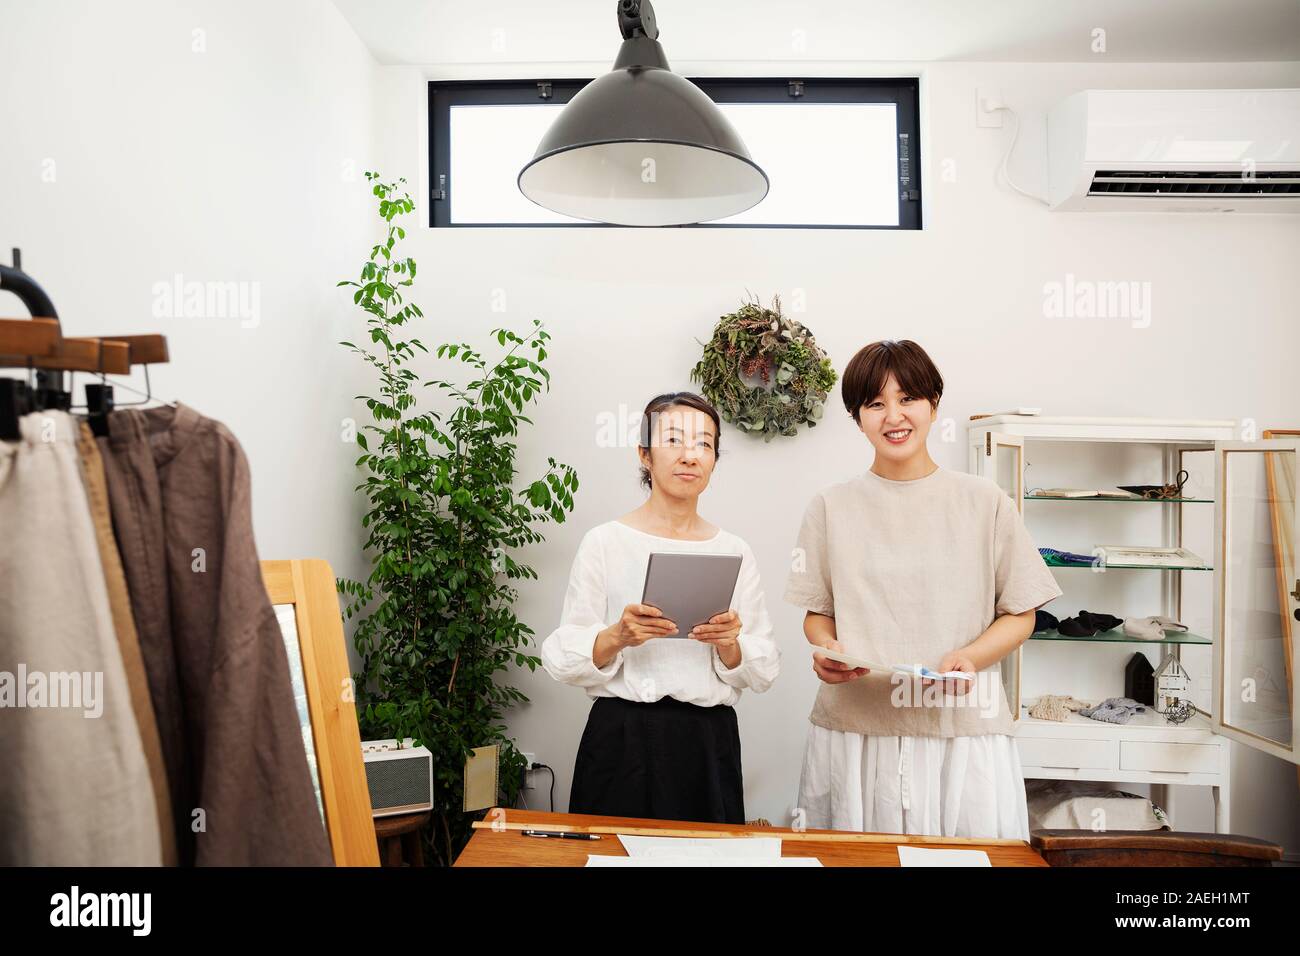 Two Japanese women standing in a small fashion boutique, holding digital tablet, smiling at camera. Stock Photo